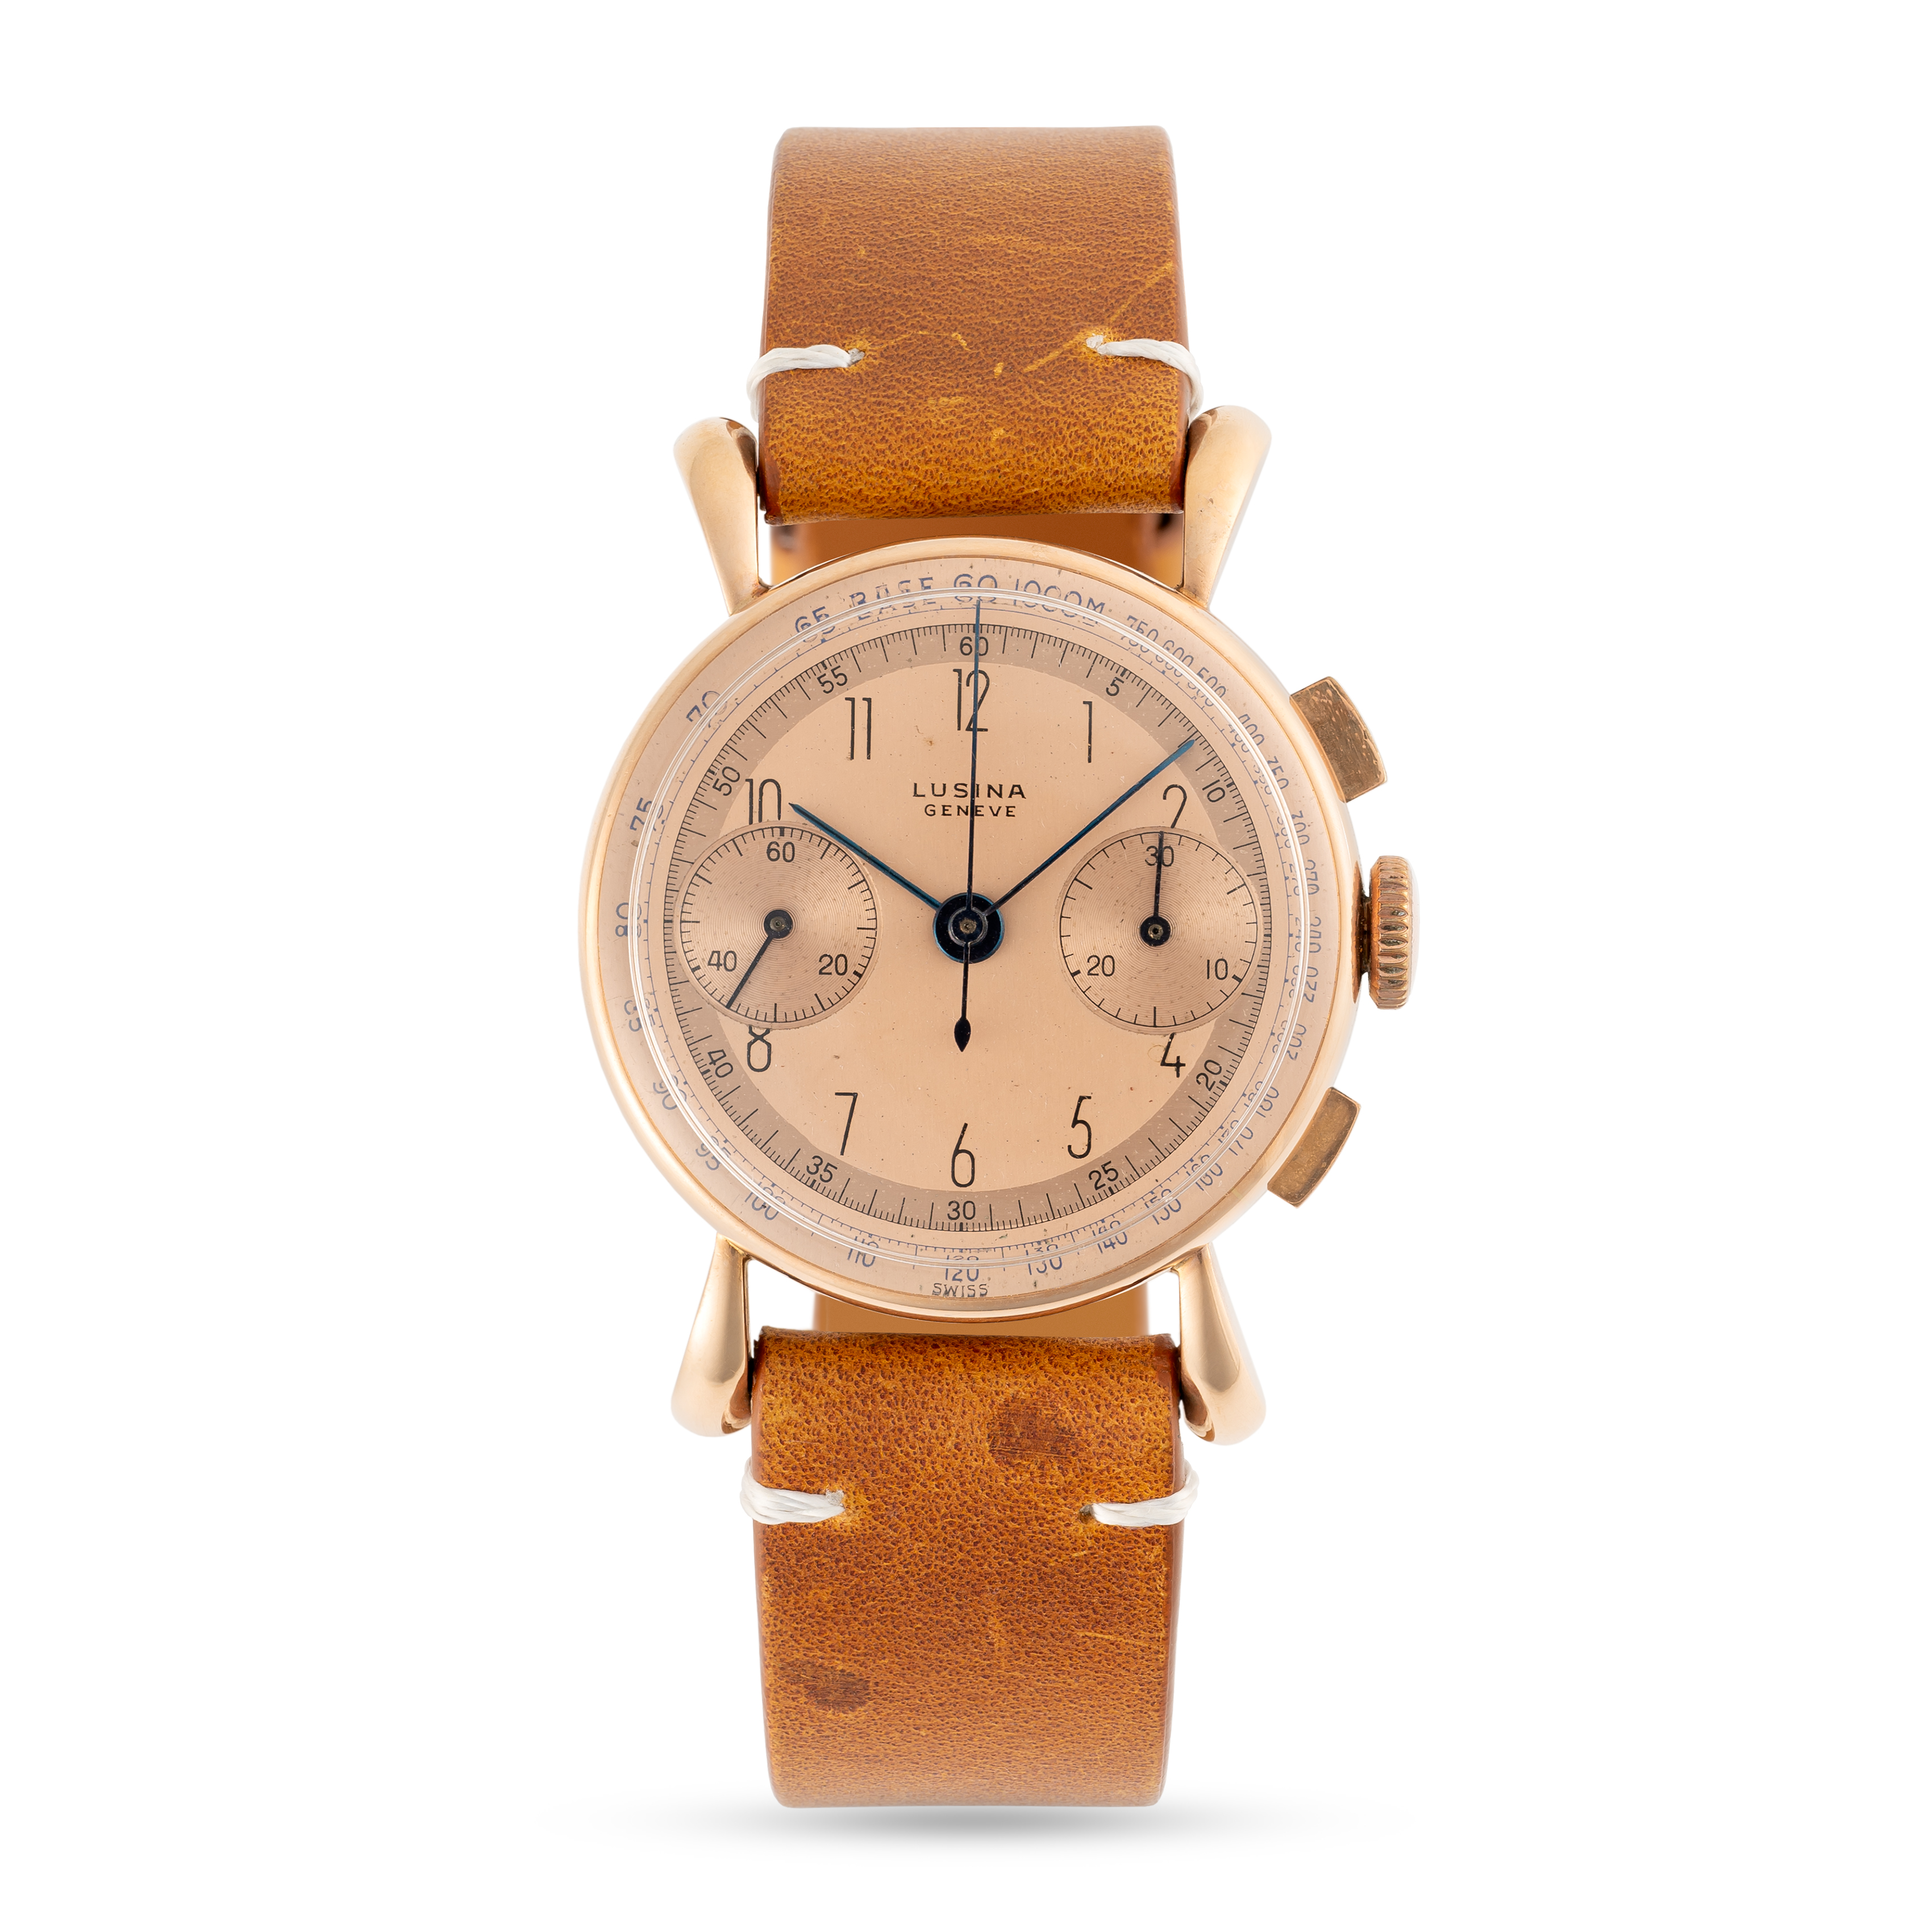 A RARE GENTLEMAN'S SIZE 18K SOLID PINK GOLD LUSINA CHRONOGRAPH WRIST WATCH CIRCA 1940s Movement: - Image 2 of 8